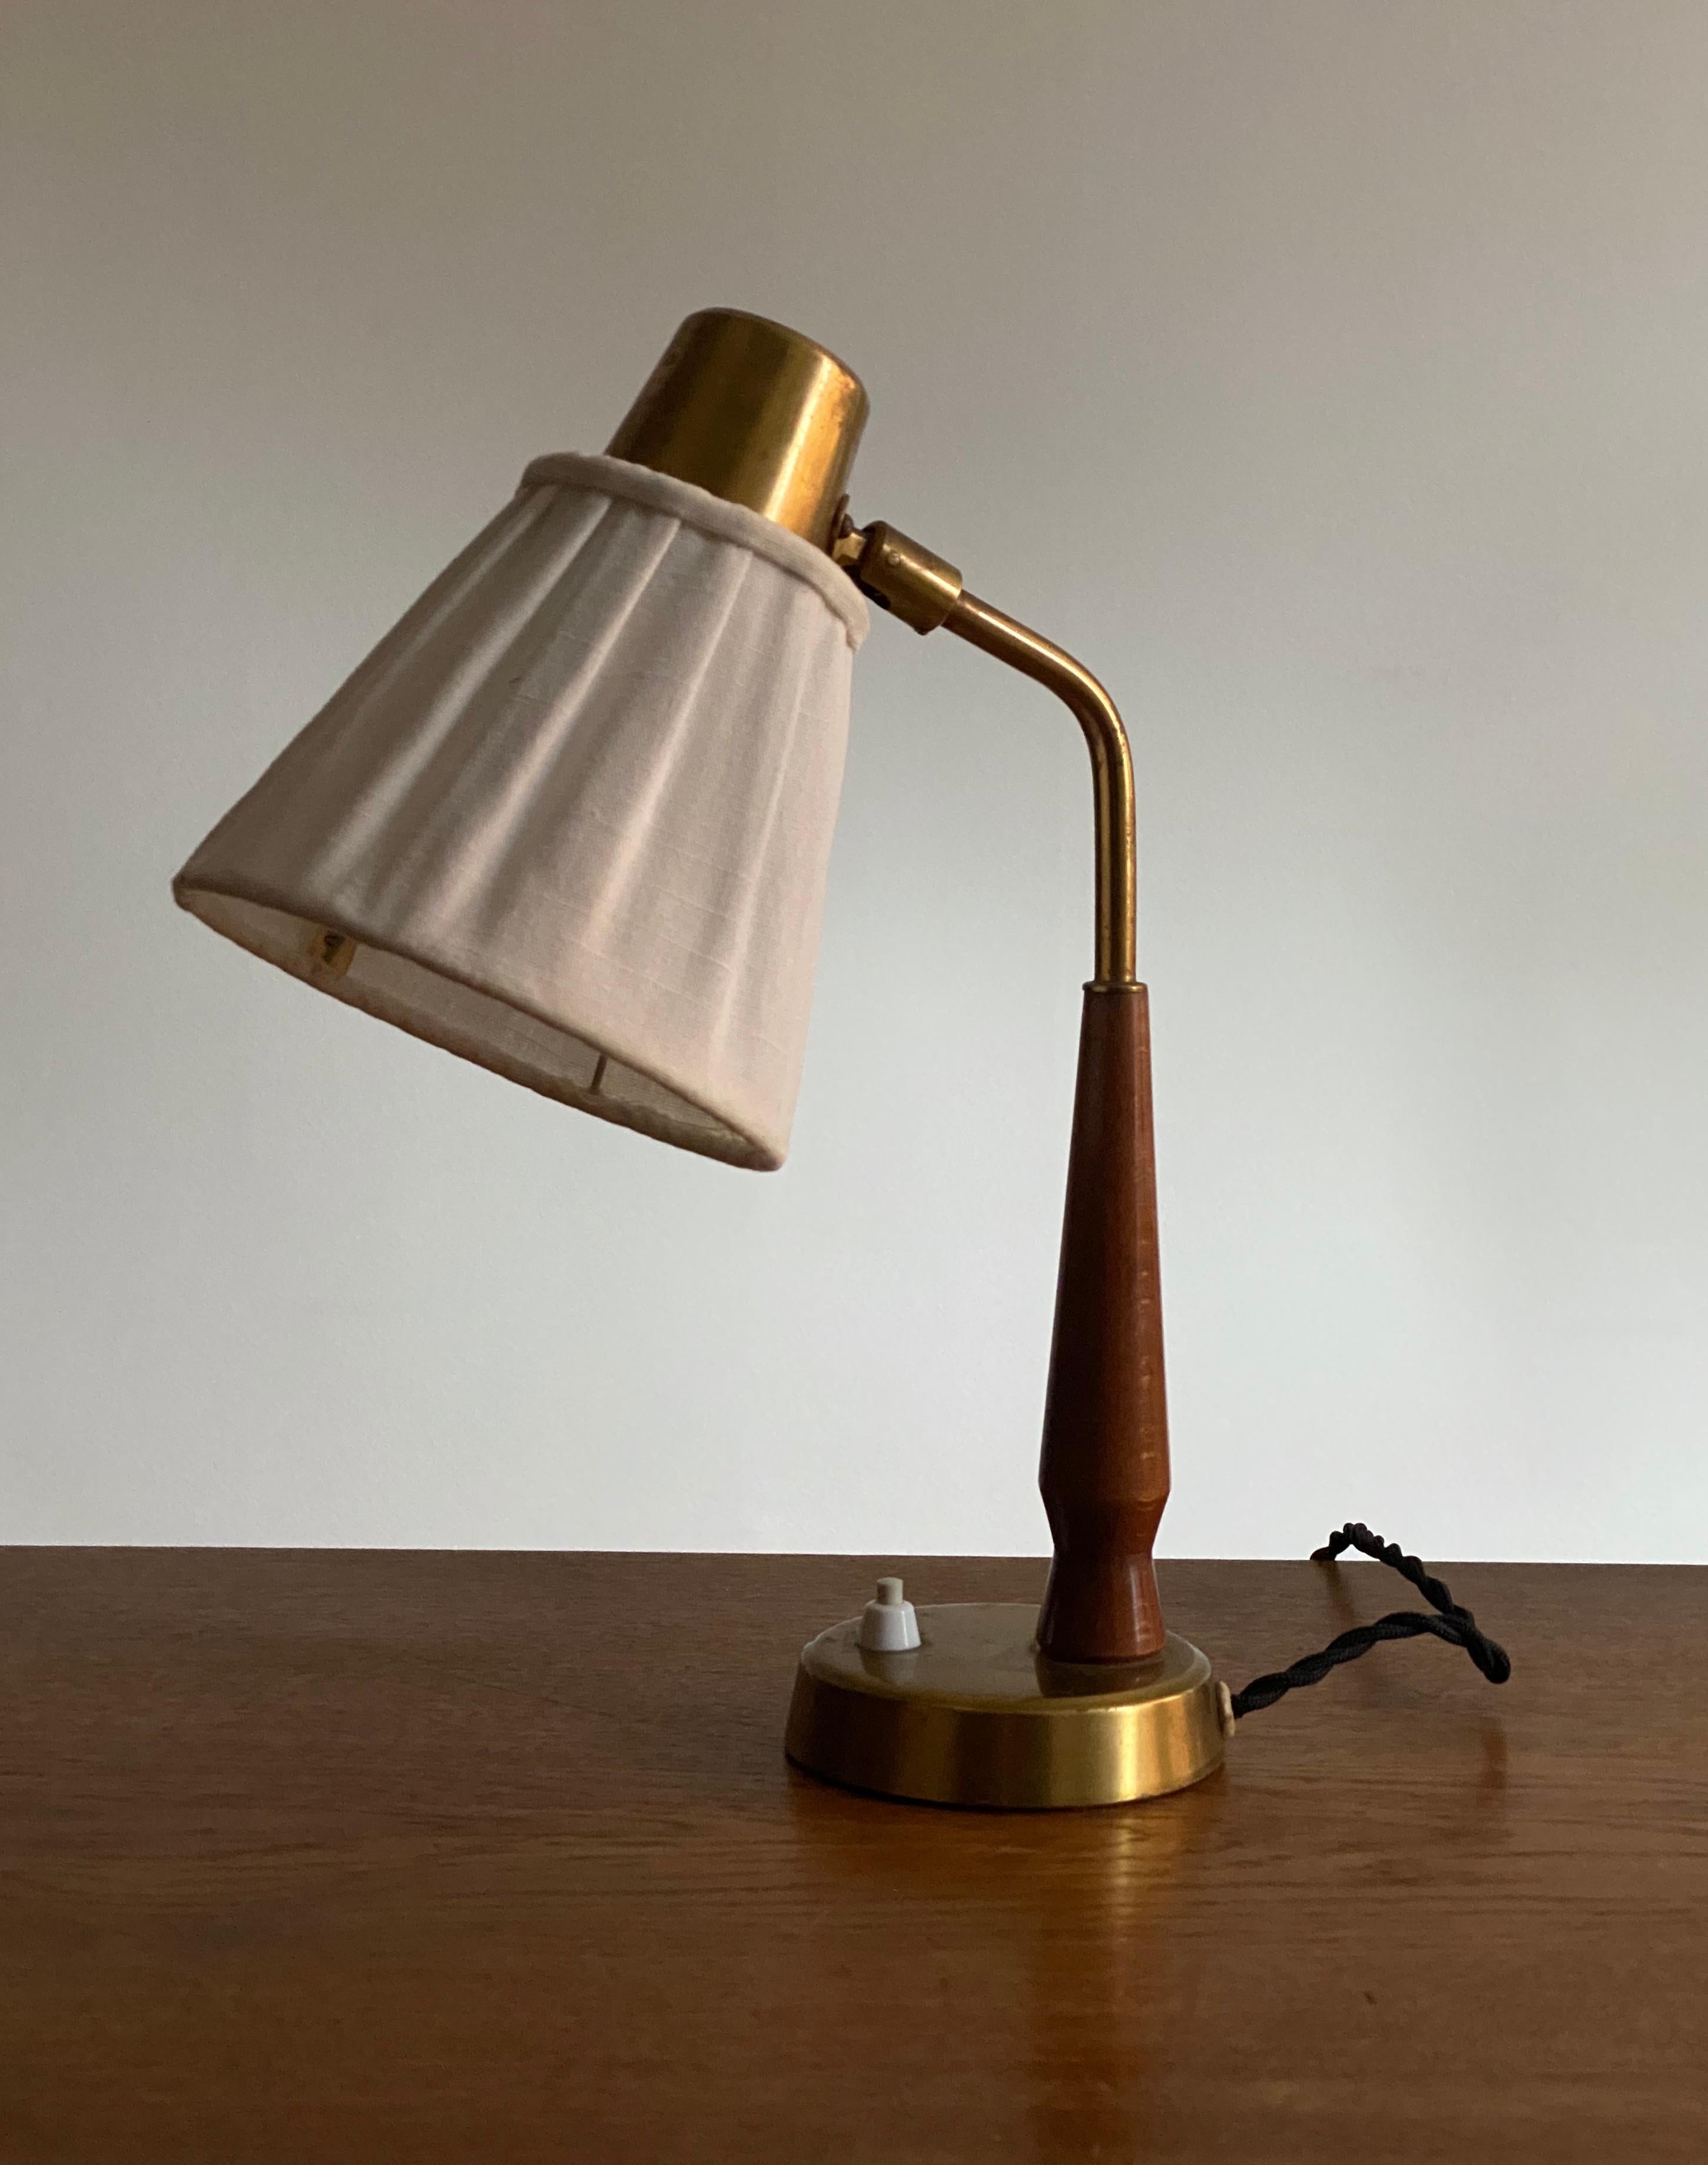 A small adjustable functionalist desk light / table lamp. Designed by Hans Bergström for his own firm, Ateljé Lyktan, Sweden 1940s. Marked with manufacturers mark and model number 